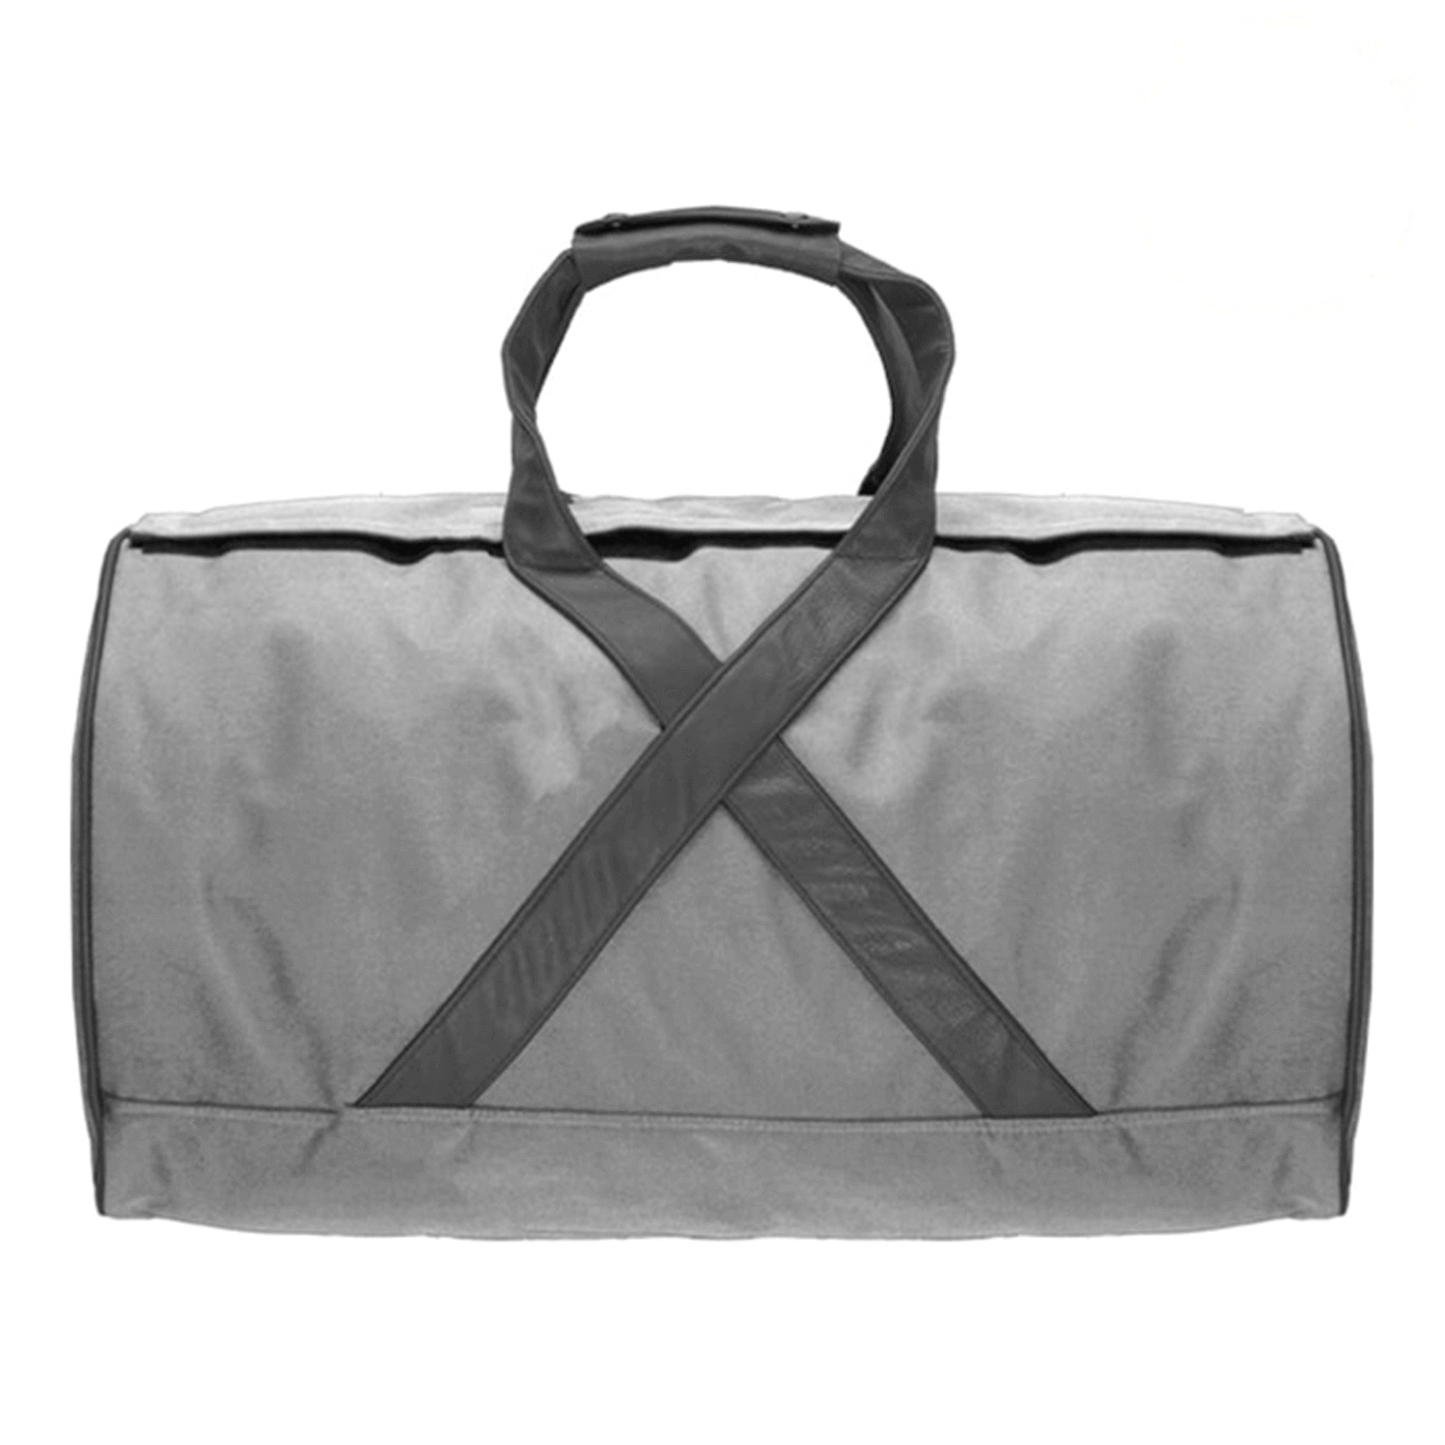 AWOL DAILY Large Gray Duffle Bag 886141 Harvest & Extraction 853336007874